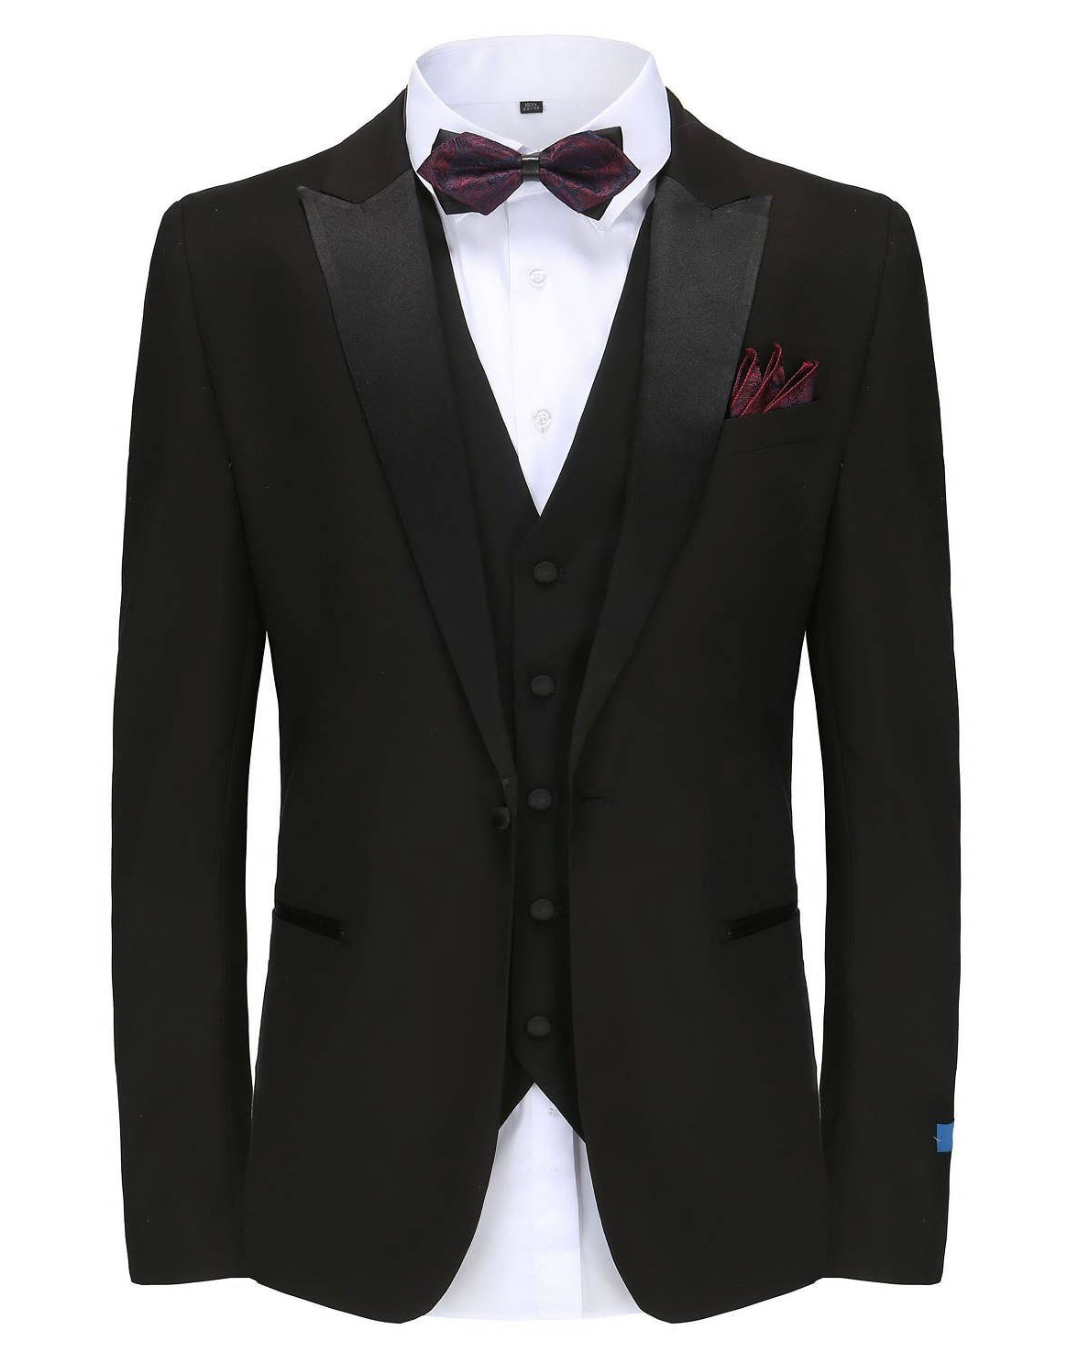 Suits & Tuxedos, Dresses, Jumpsuits, Church, Gala, Prom, Accessories ...